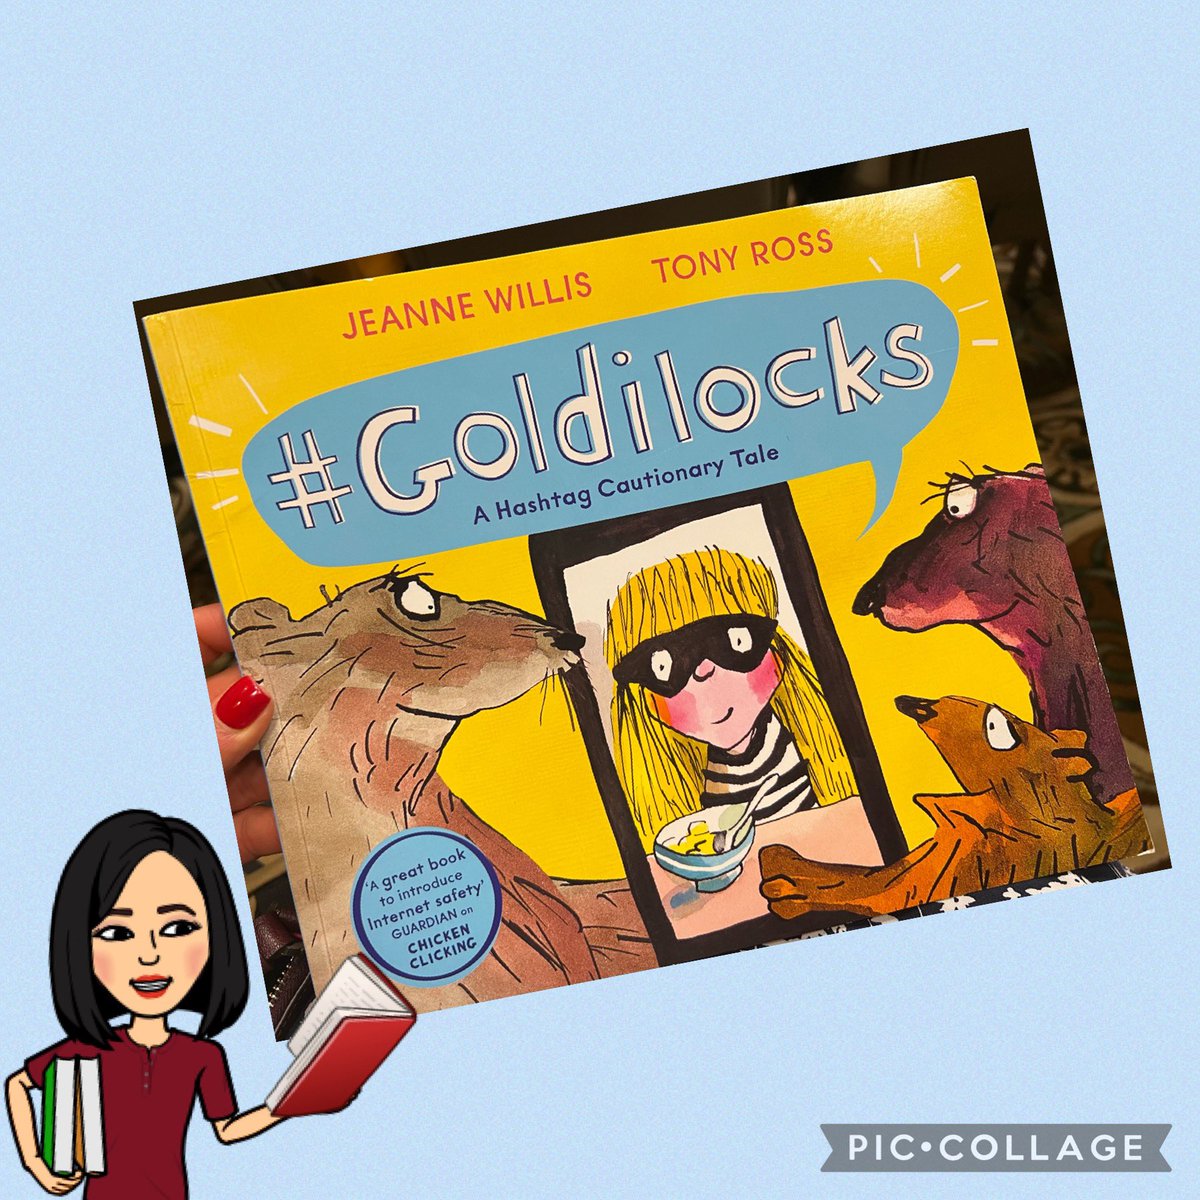 Can’t wait to use this book and other #picturebooks recommended by @Pattie_Library  to teach our students about #digitalcitizenship #BetterTogether #TCEA @VDelSol_ES @Sparks_Interest